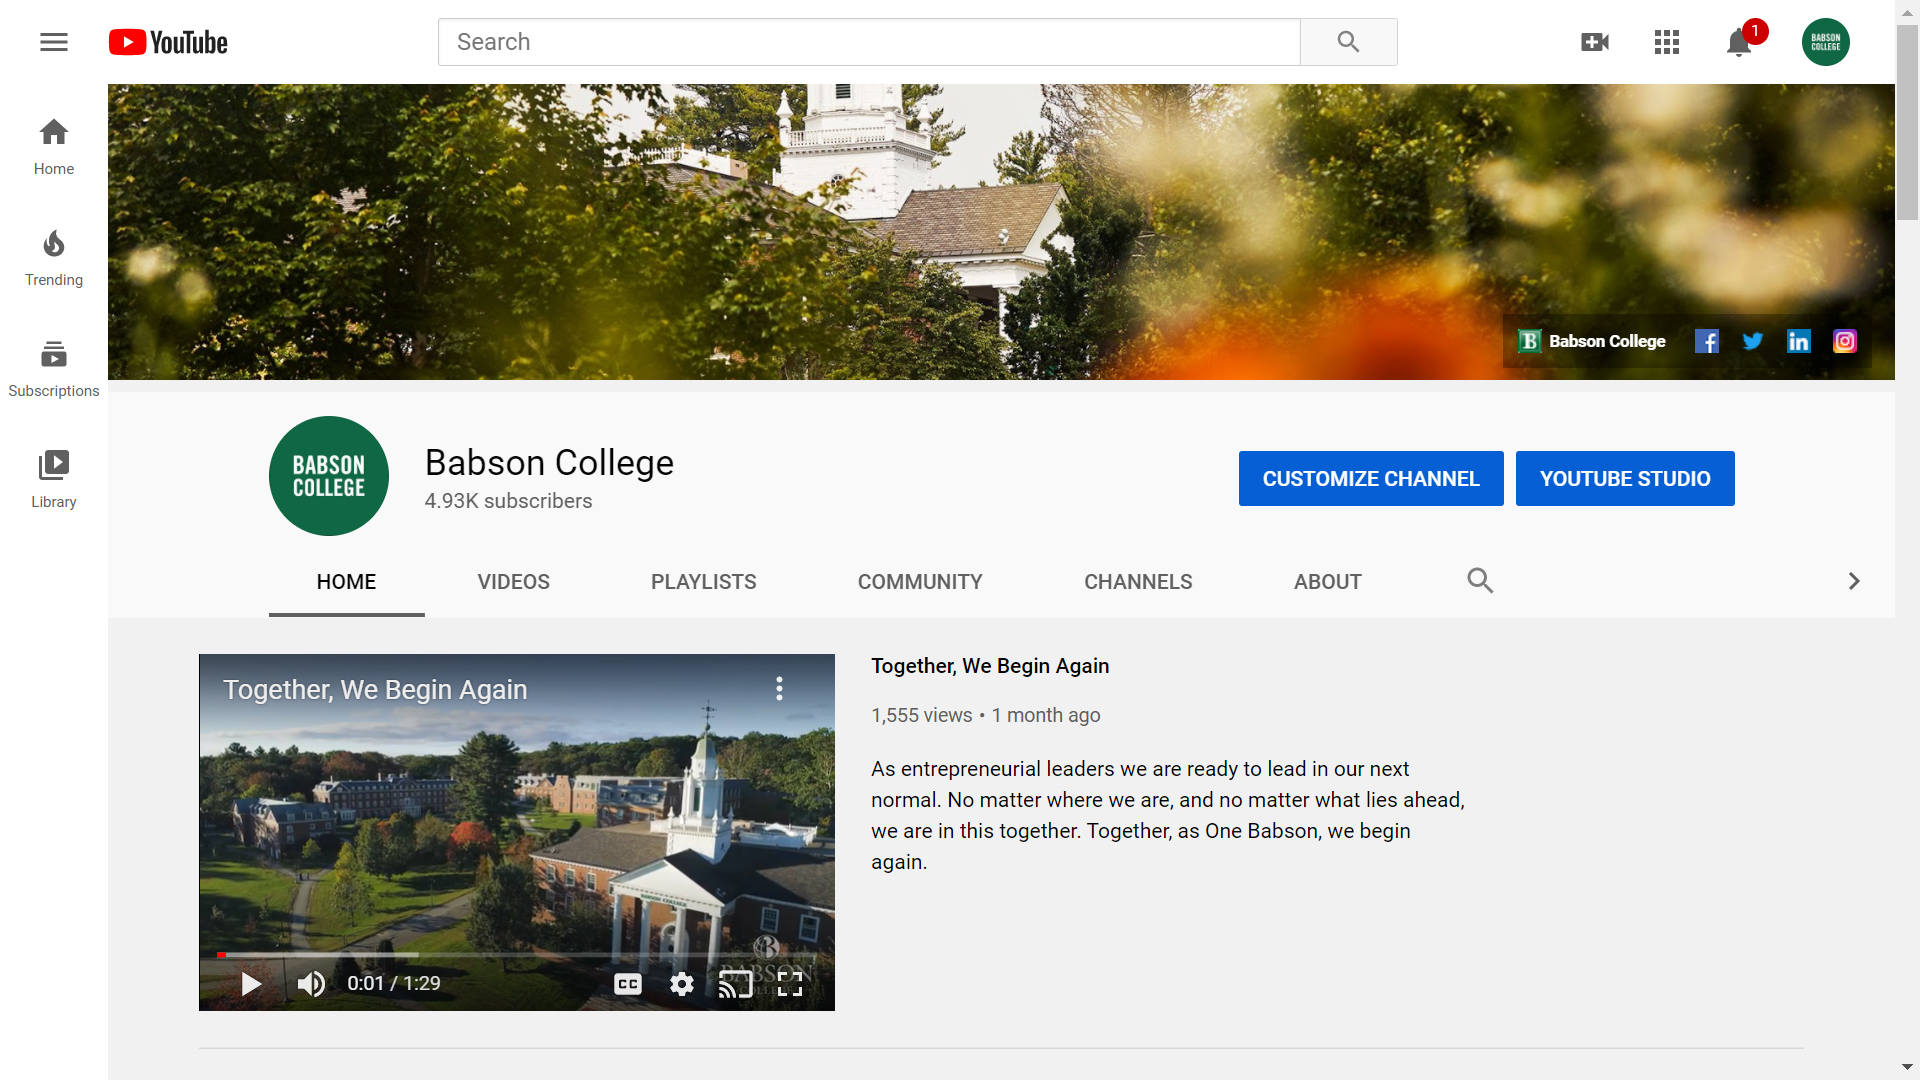 Babson College on YouTube